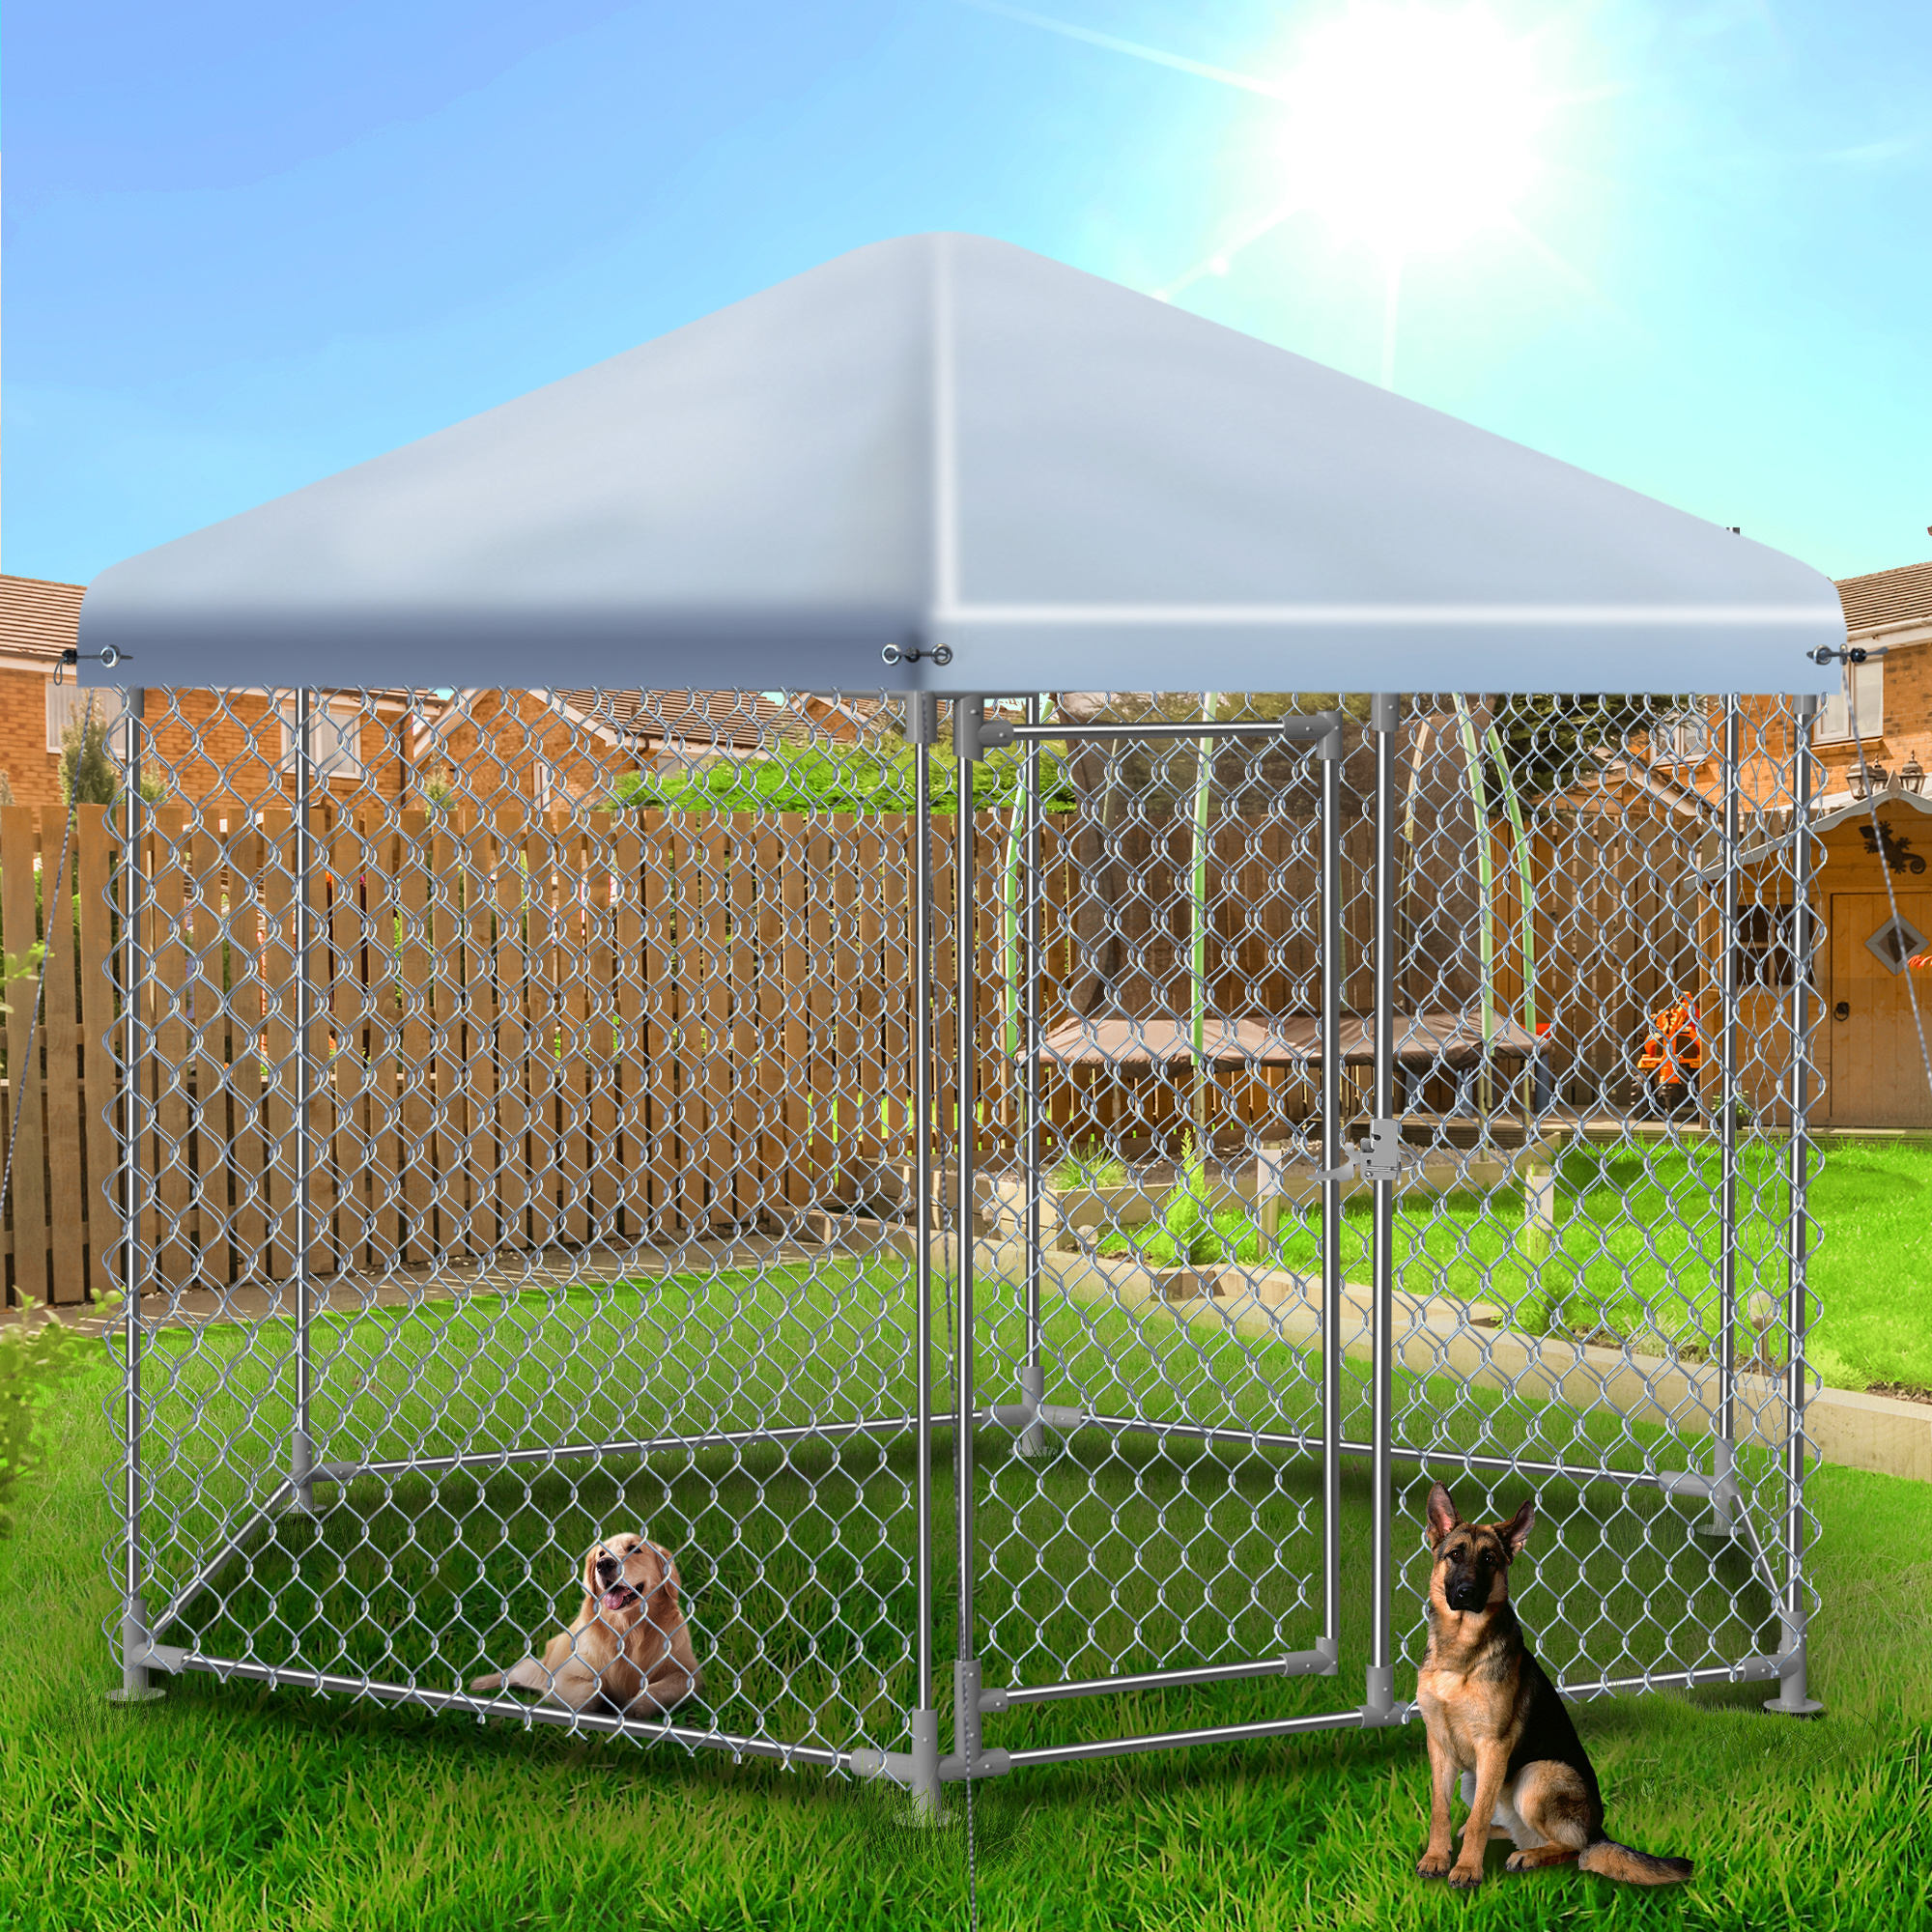 

Viwat 9.3x9.3x8.2 Ft Large Dog Kennel Outside With Roof,outdoor Dog Kennel With Metal Gate,heavy Duty Dog Kennel With Lock For Outdoor Backyard.